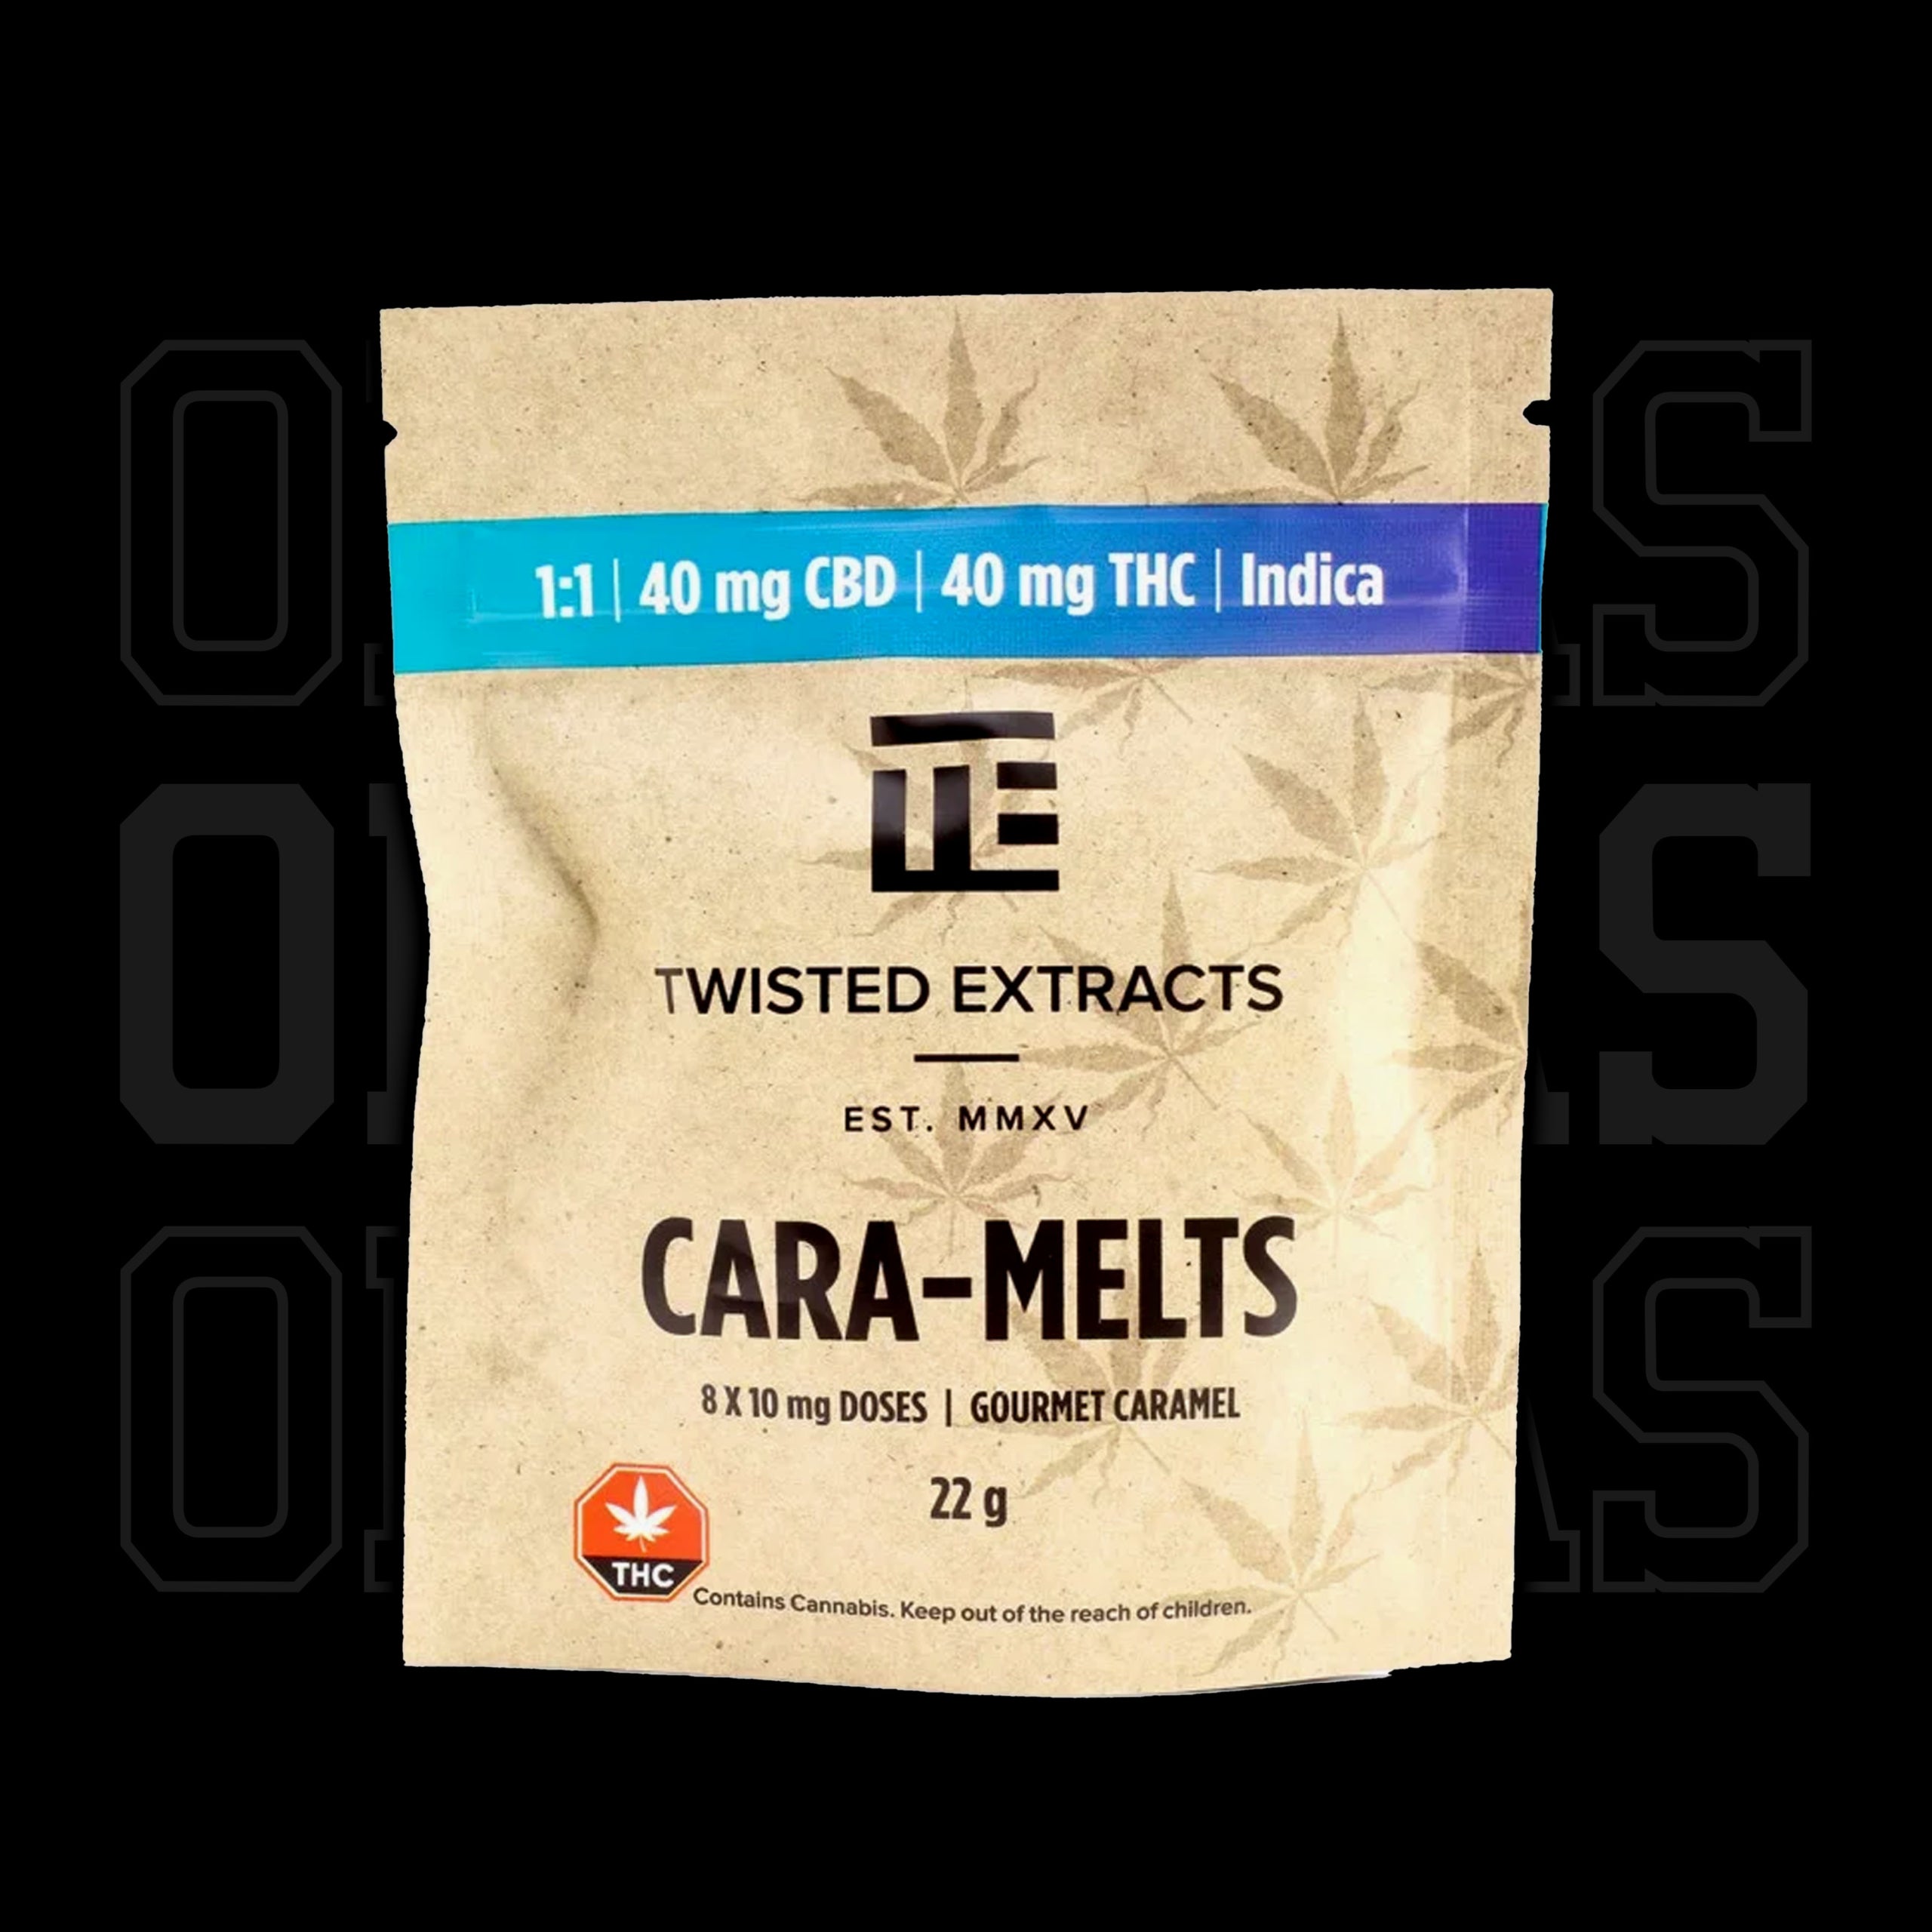 6edibles-twisted-extracts-caramelts-40mg-cbd-40mg-thc-indica-pkg-1024×1024-1